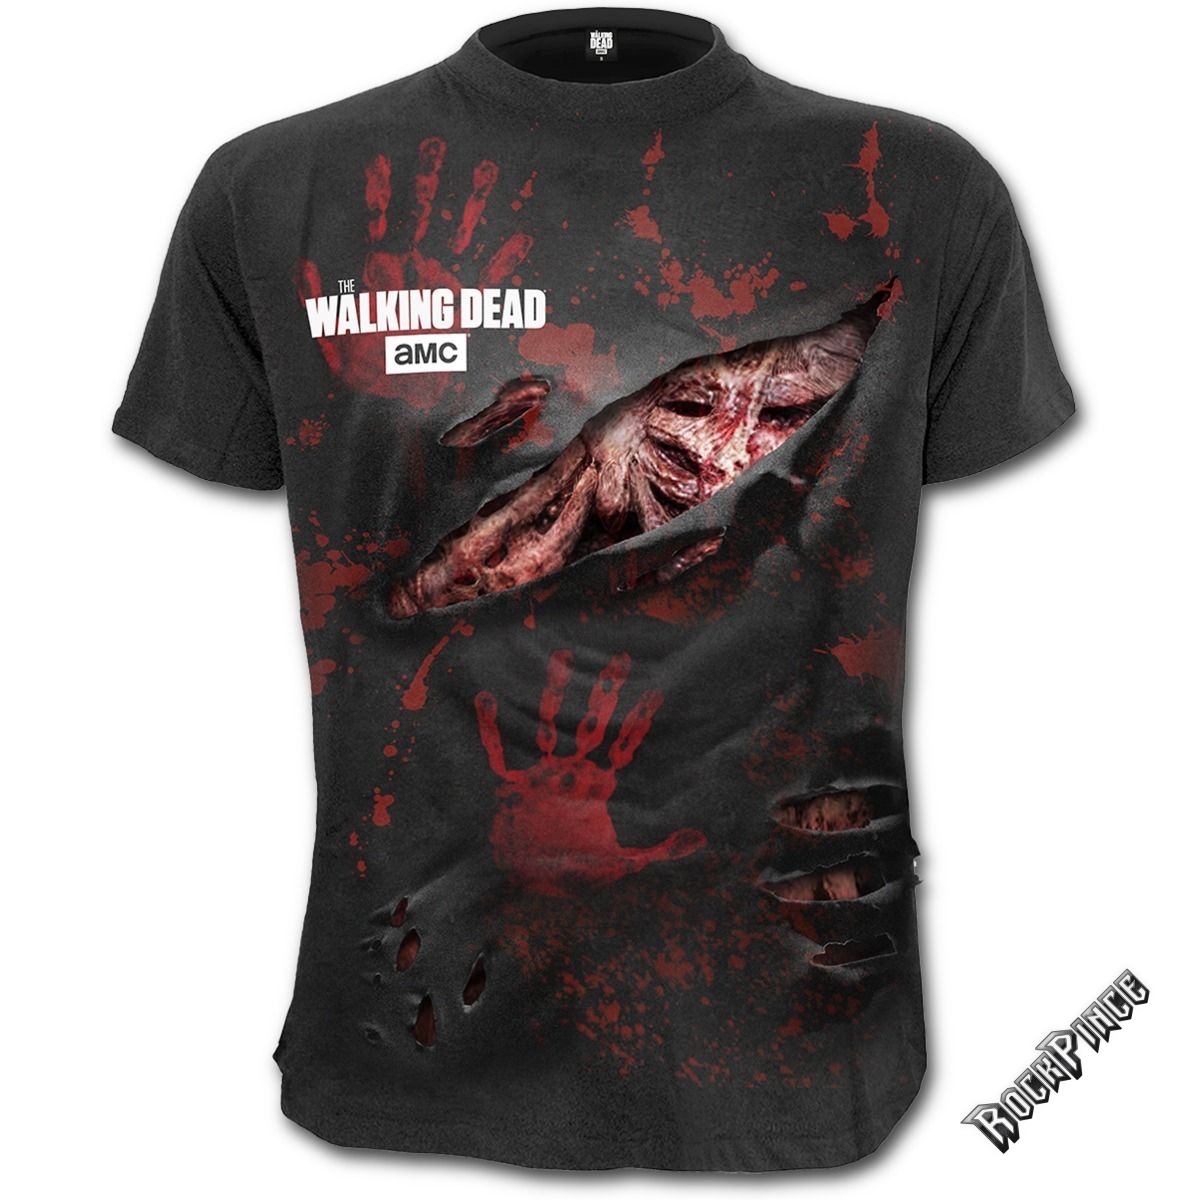 The Walking Dead - ZOMBIE - ALL INFECTED - Ripped T-Shirt Black (Plain) - G004M125